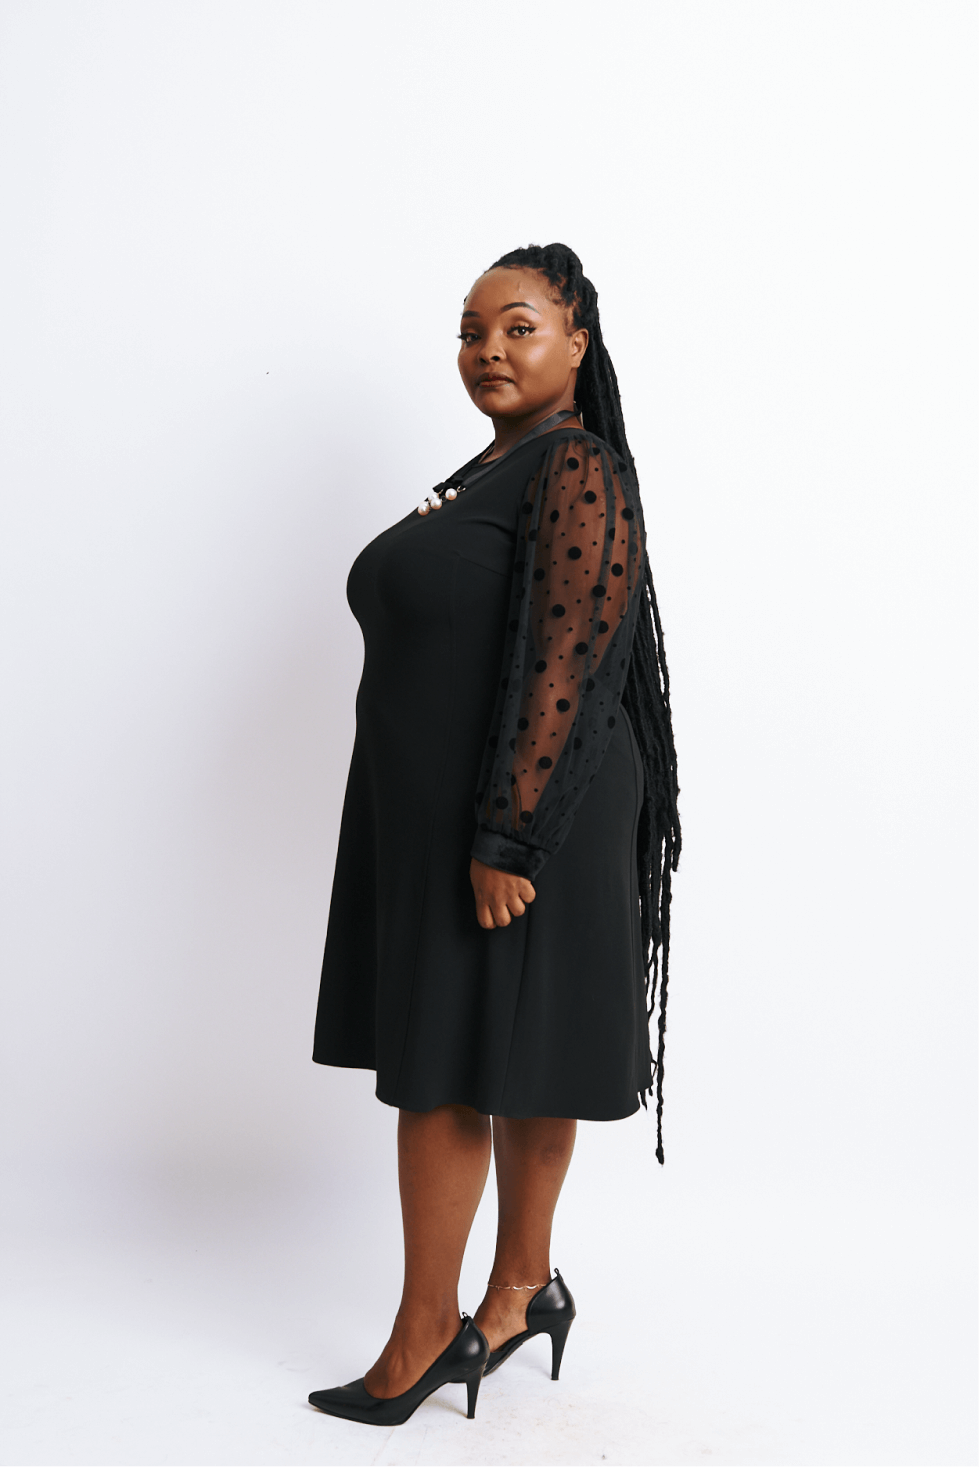 Shop Black Polka Shear Arms Shift Dress by The Fashion Frenzy on Arrai. Discover stylish, affordable clothing, jewelry, handbags and unique handmade pieces from top Kenyan & African fashion brands prioritising sustainability and quality craftsmanship.